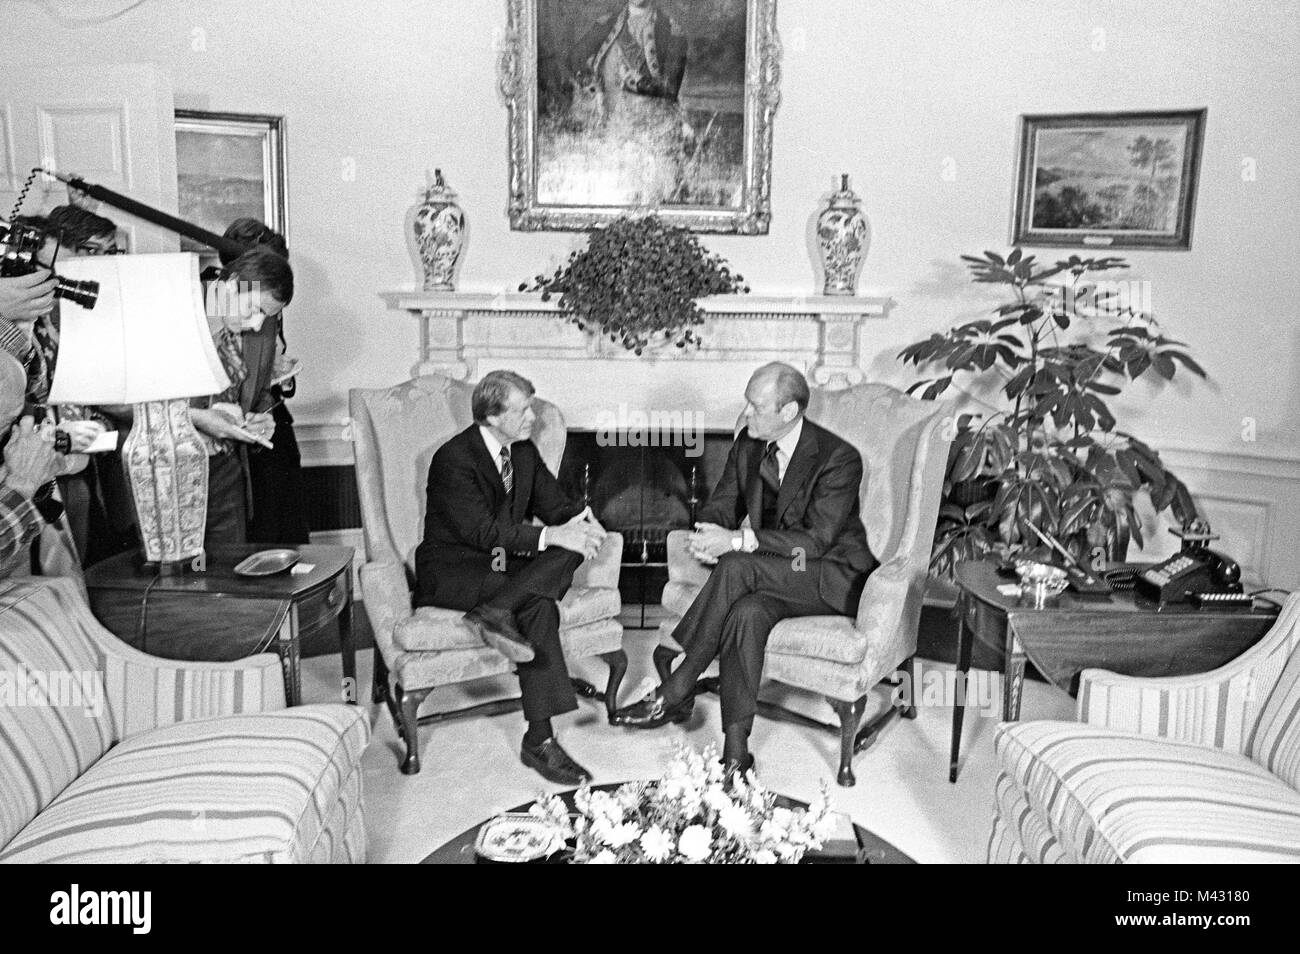 United States President Gerald R. Ford, right, meets U.S. President Elect Jimmy Carter, left, in the Oval Office of the White House in Washington, DC to discuss the transition on November 22, 1976. This is the first meeting between the two men since the Presidential debates during the campaign. Credit: Benjamin E. 'Gene' Forte/CNP Photo: Benjamin E. 'gene' Forte/Consolidated News Photos/Benjamin E. 'Gene' Forte - CNP Stock Photo